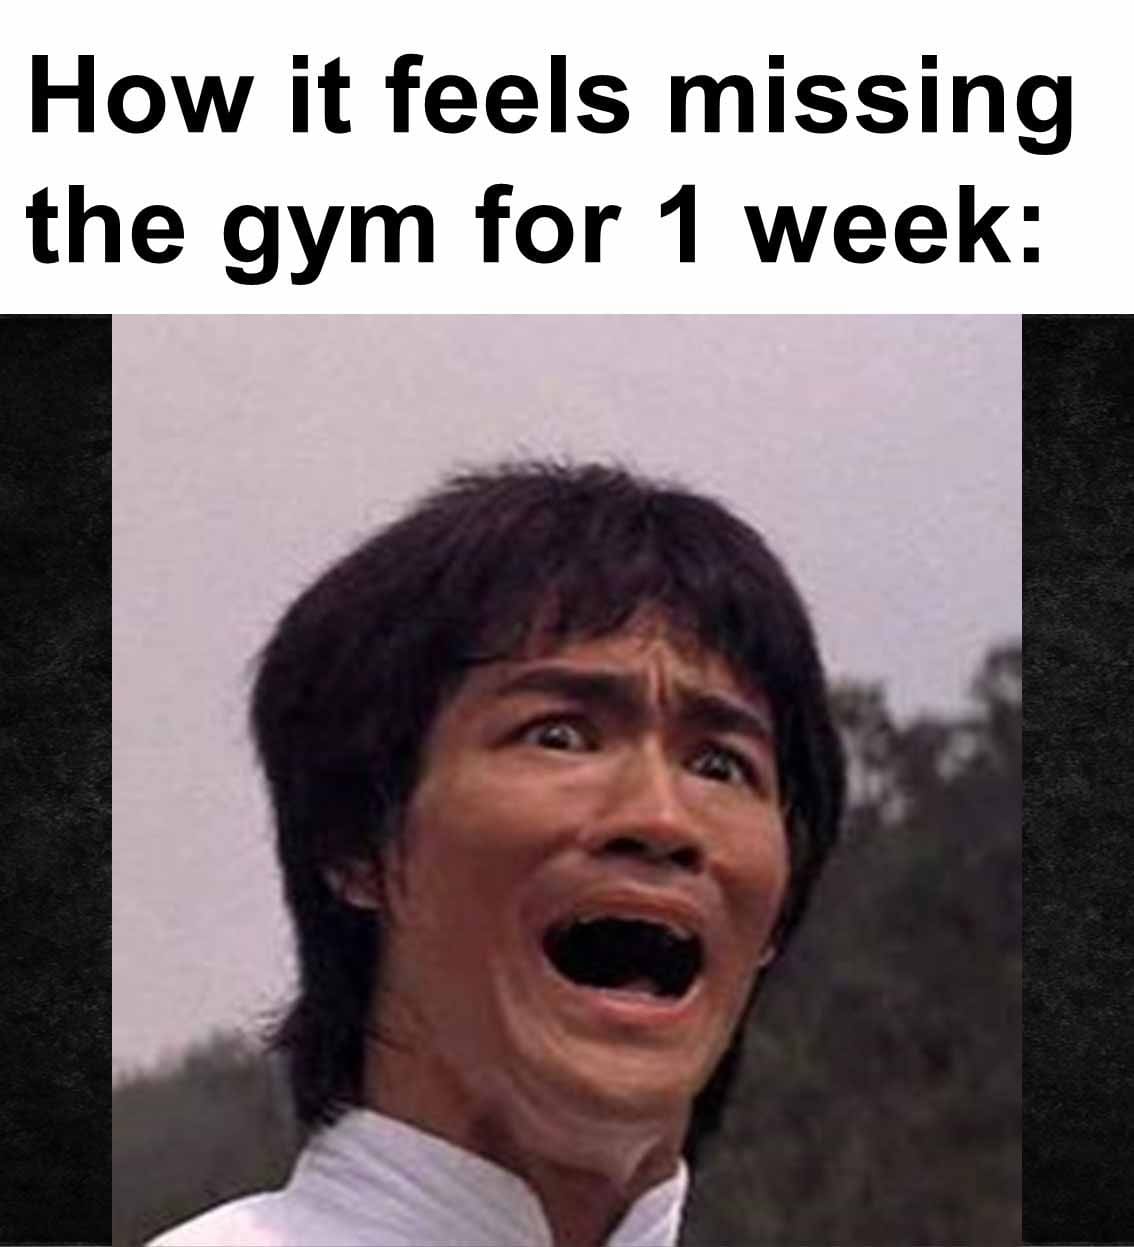 How it feels missing the gym for 1 week